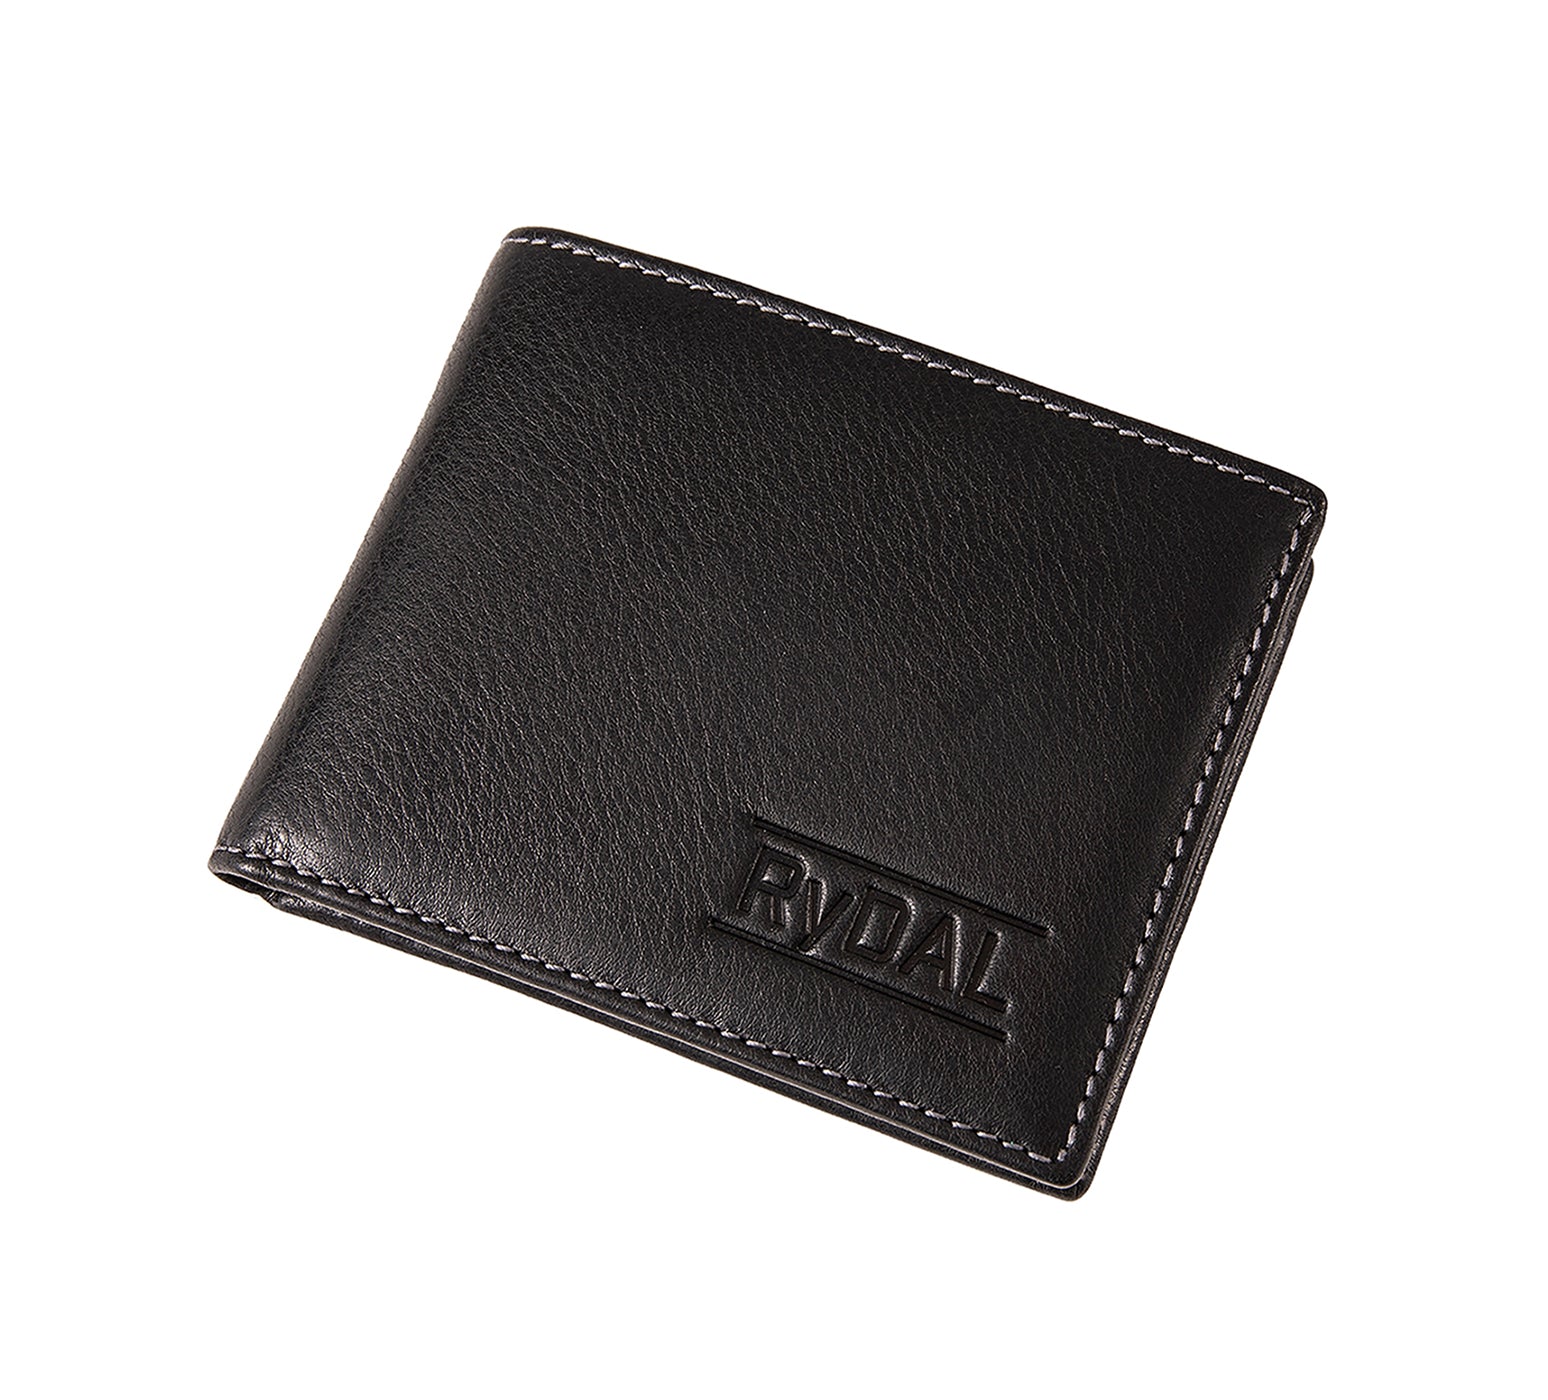 Mens Leather Wallet with Coin Pocket from Rydal in 'Black' showing wallet closed.